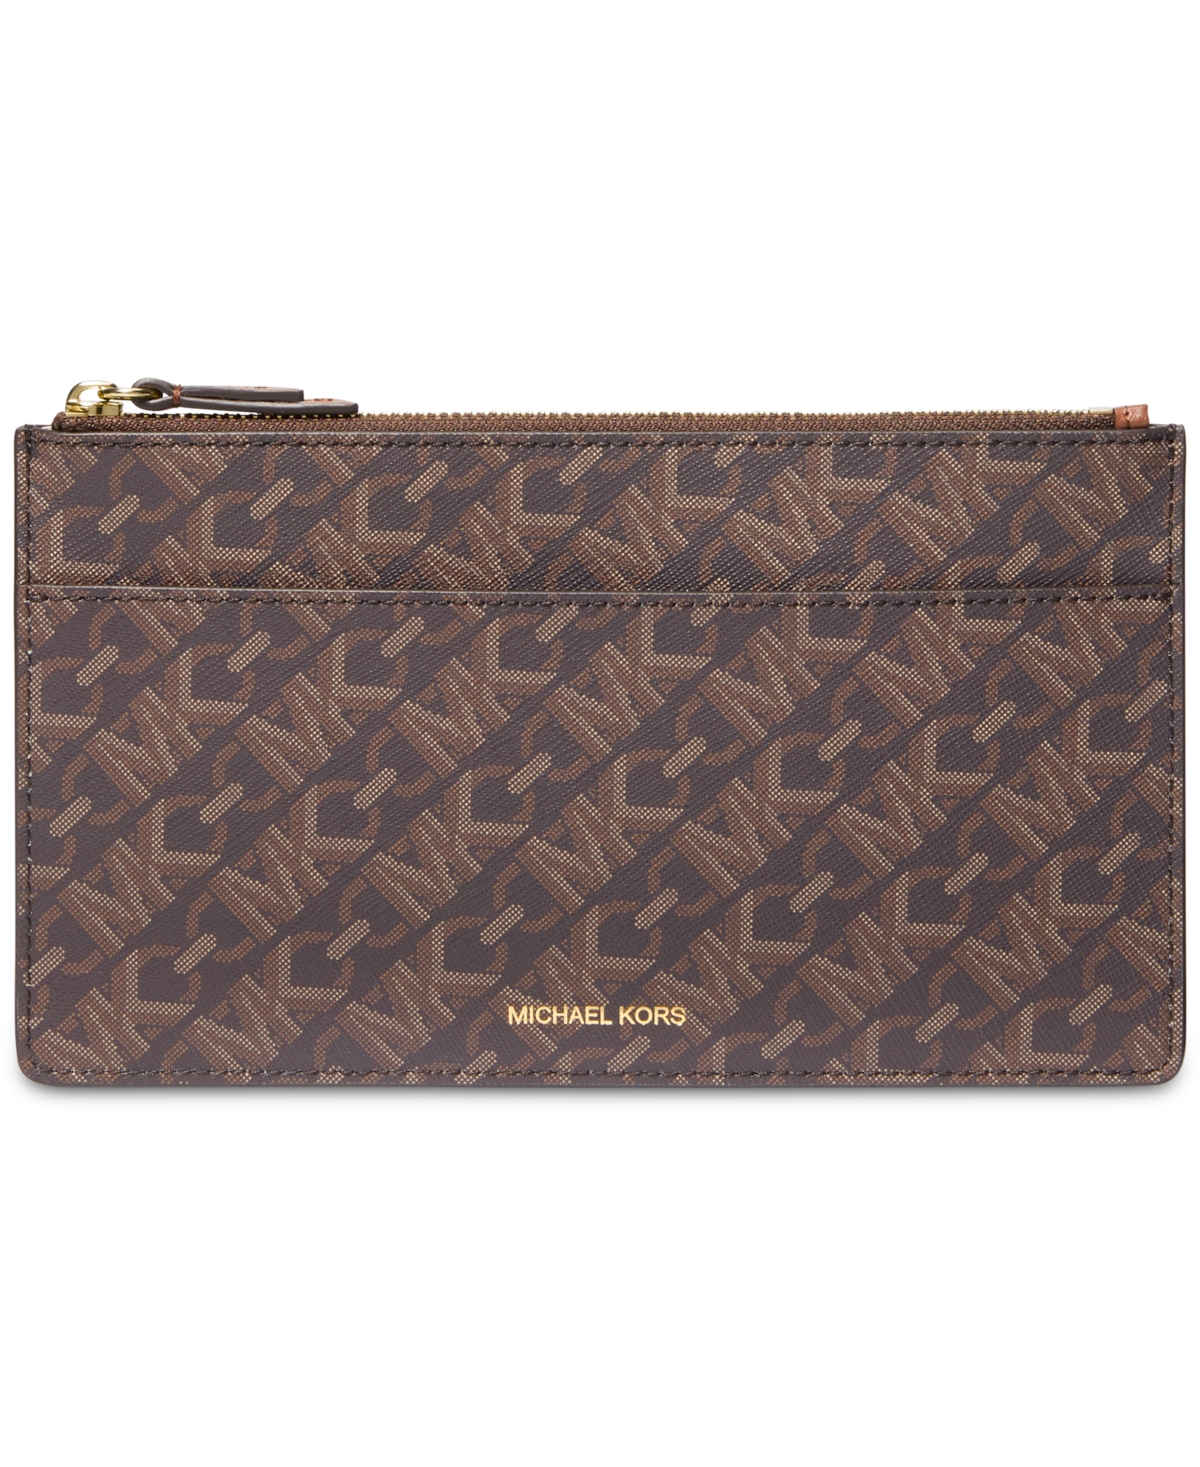 Michael Kors Michael  Empire Large 3 In 1 Travel Wallet In Brn,luggage